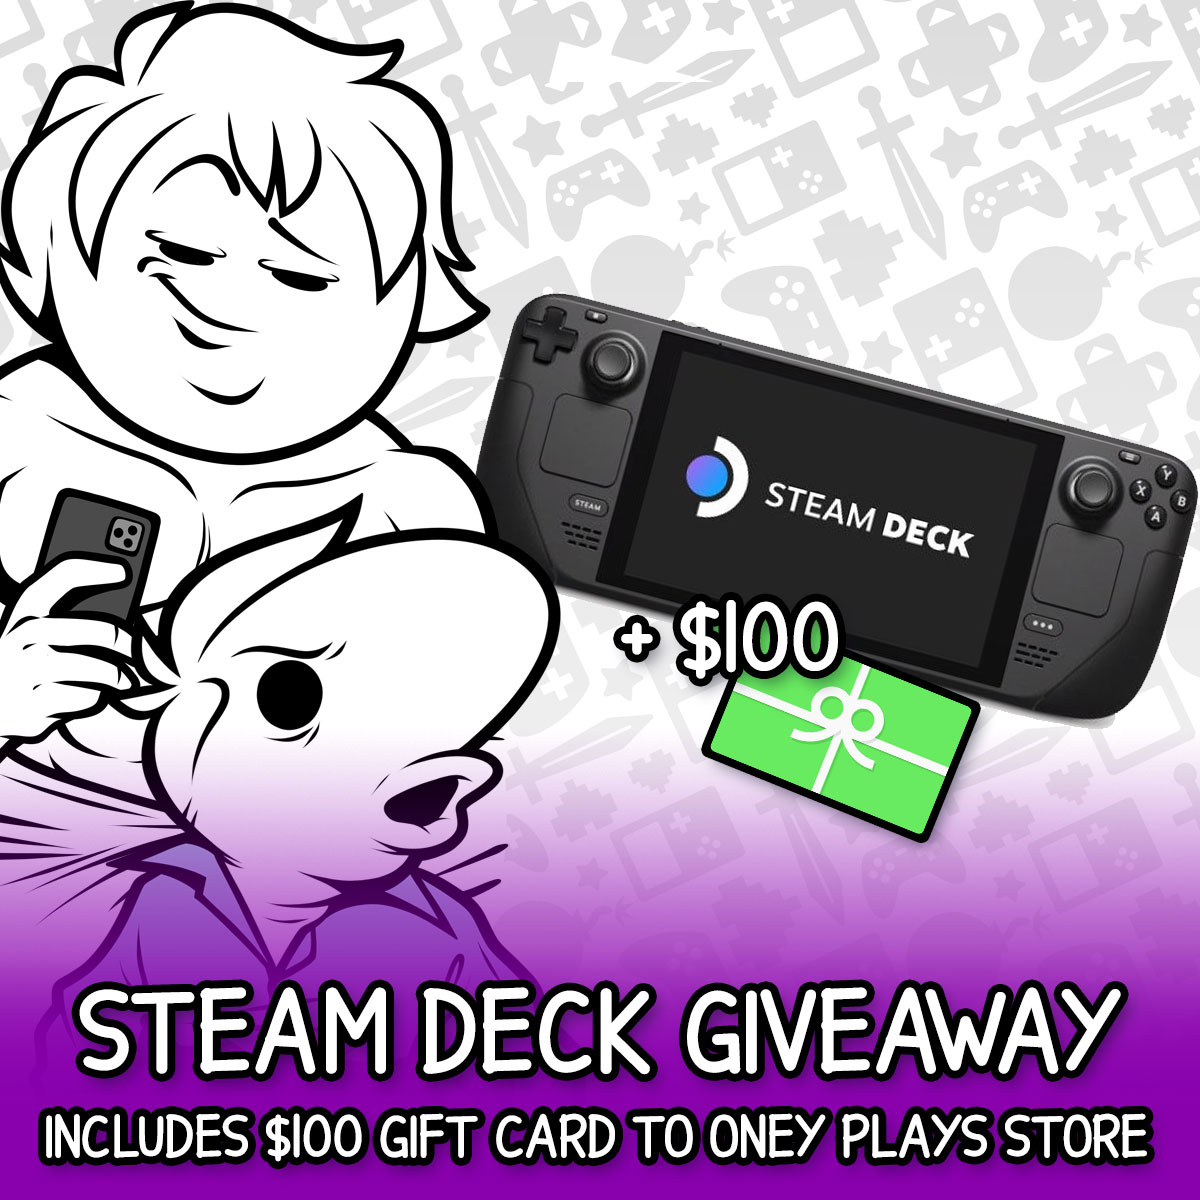 📢ONEY PLAYS CONTEST ANNOUNCEMENT ✔️ We're giving away 1 Steam Deck (64GB) + $100 Gift Card to our store, courtesy of @SharkRobotStore! ✔️Enter by using the link below, Contest Ends May 31st at Midnight Pacific! ENTER HERE ⬇️⬇️ gleam.io/JaZOK/oney-pla…